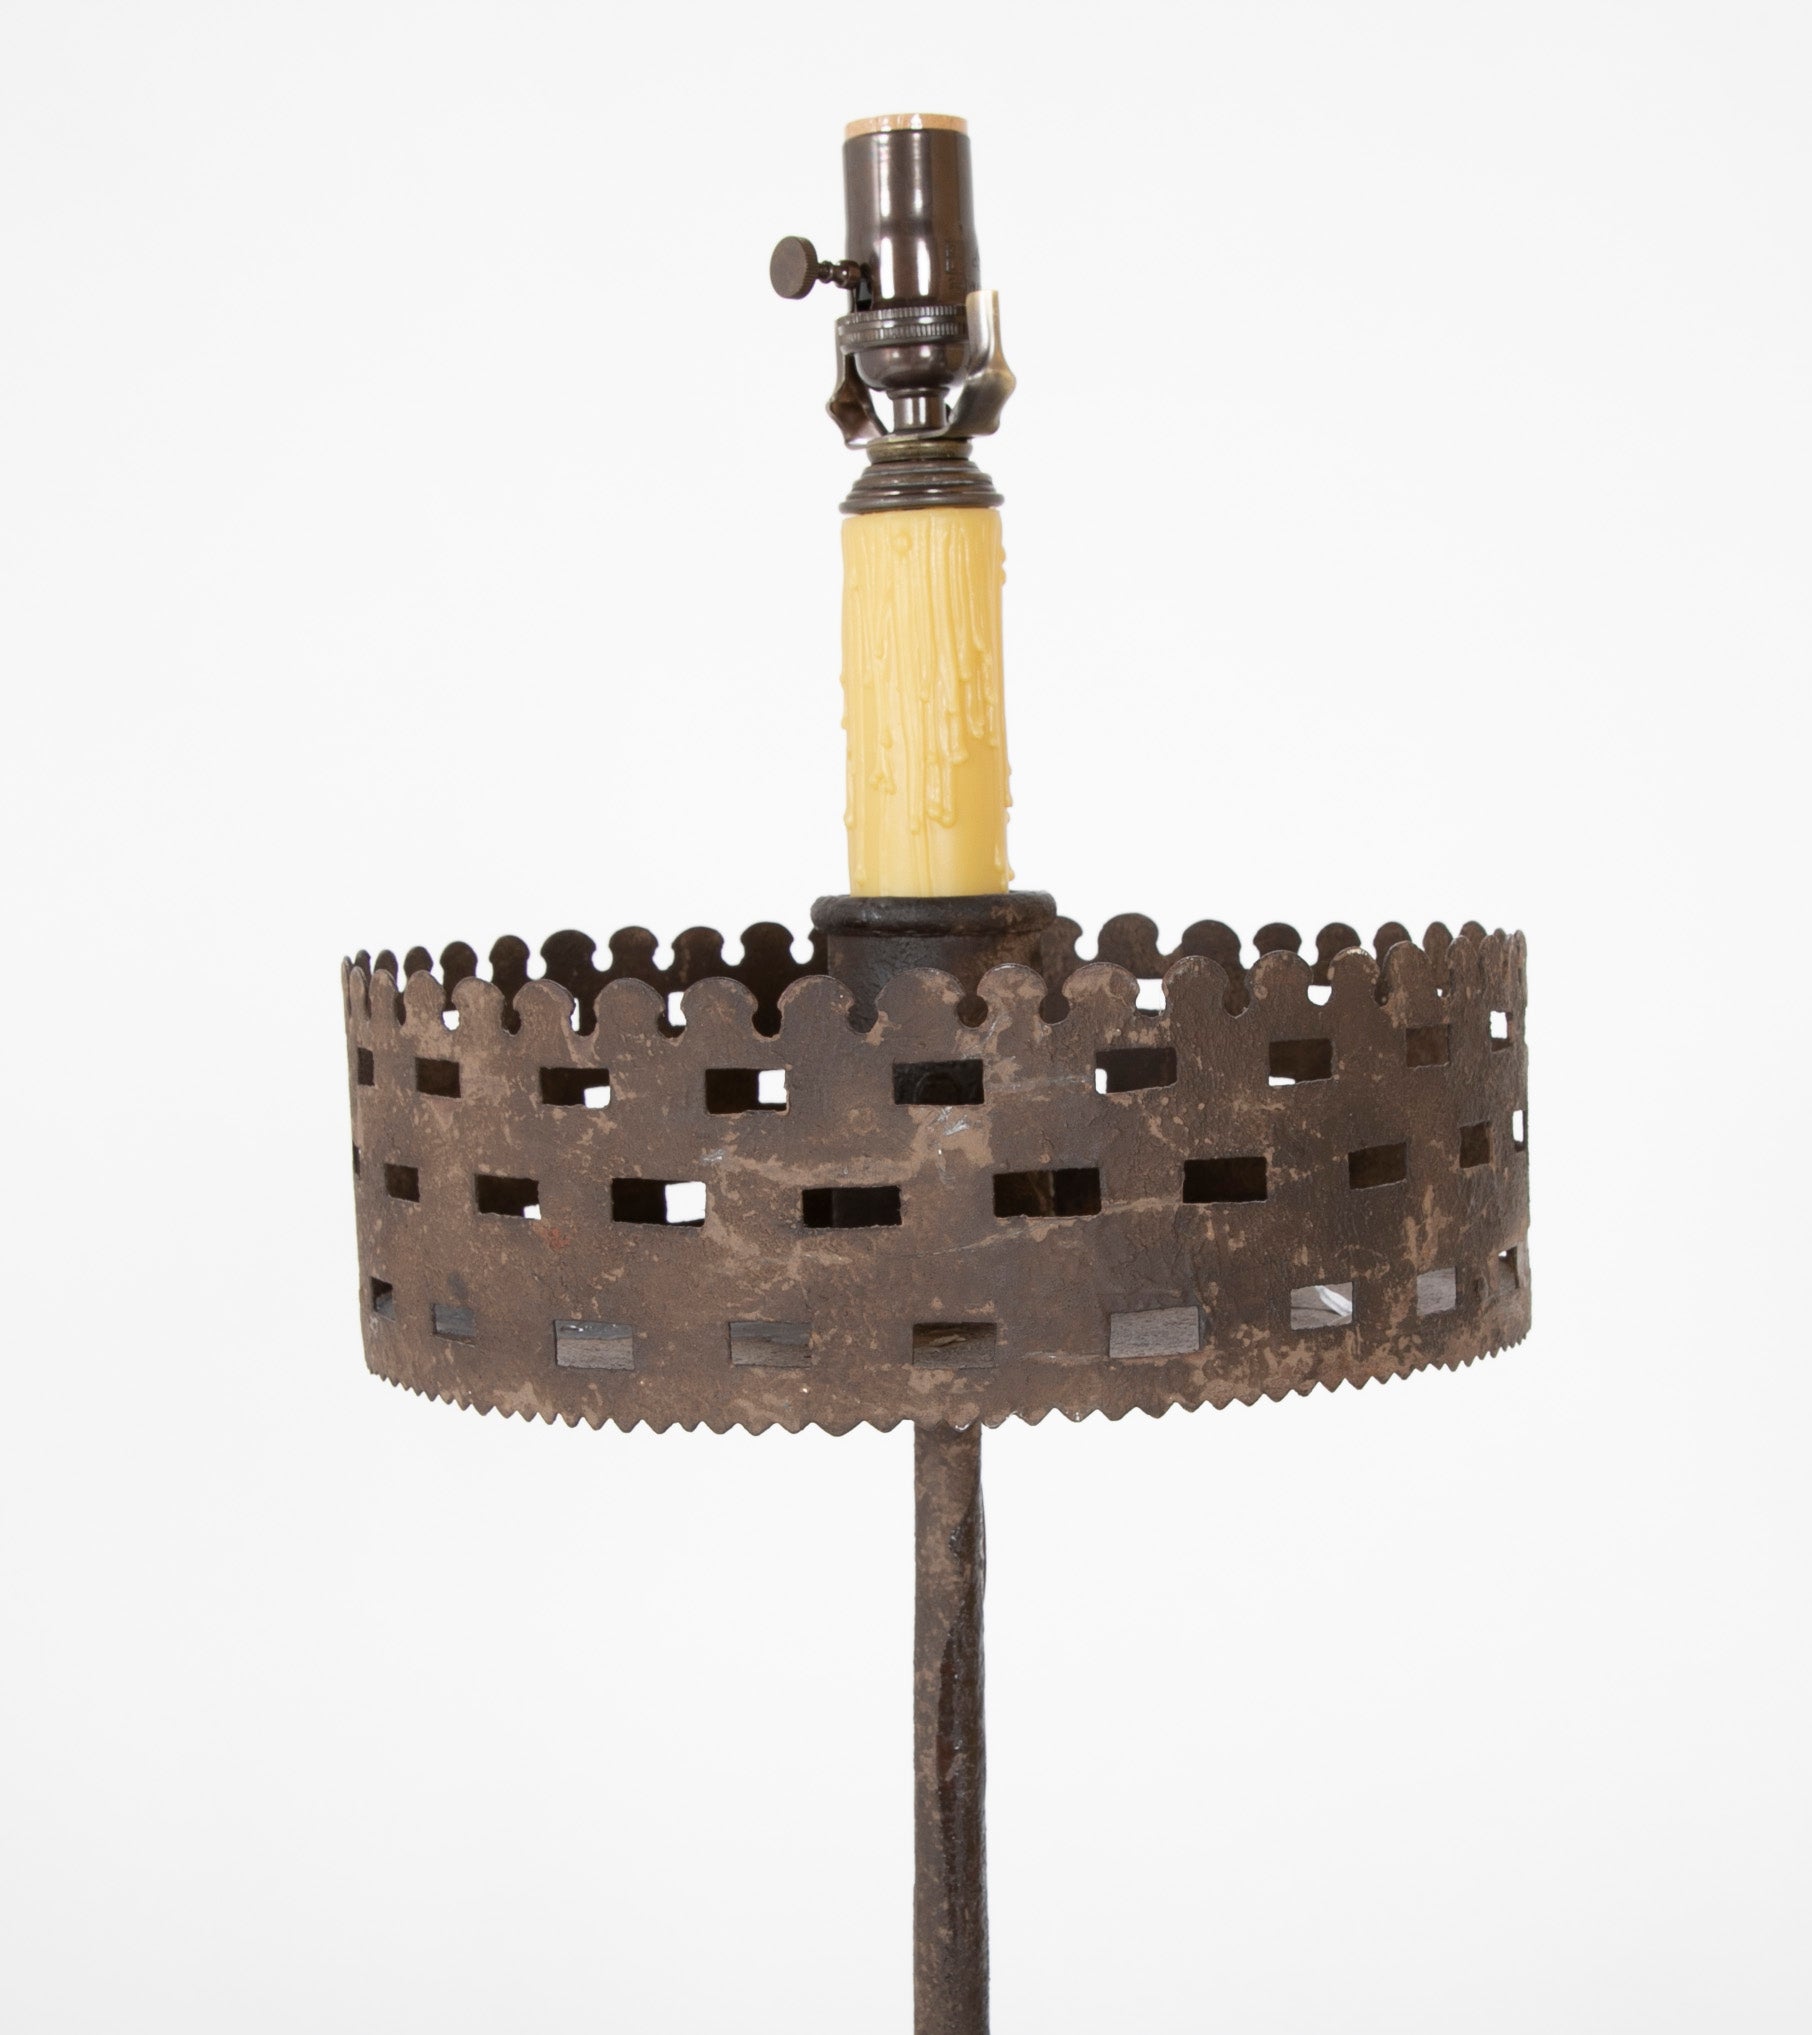 Handwrought Iron Pricket Stick now a Lamp with Crenulated Bobeche